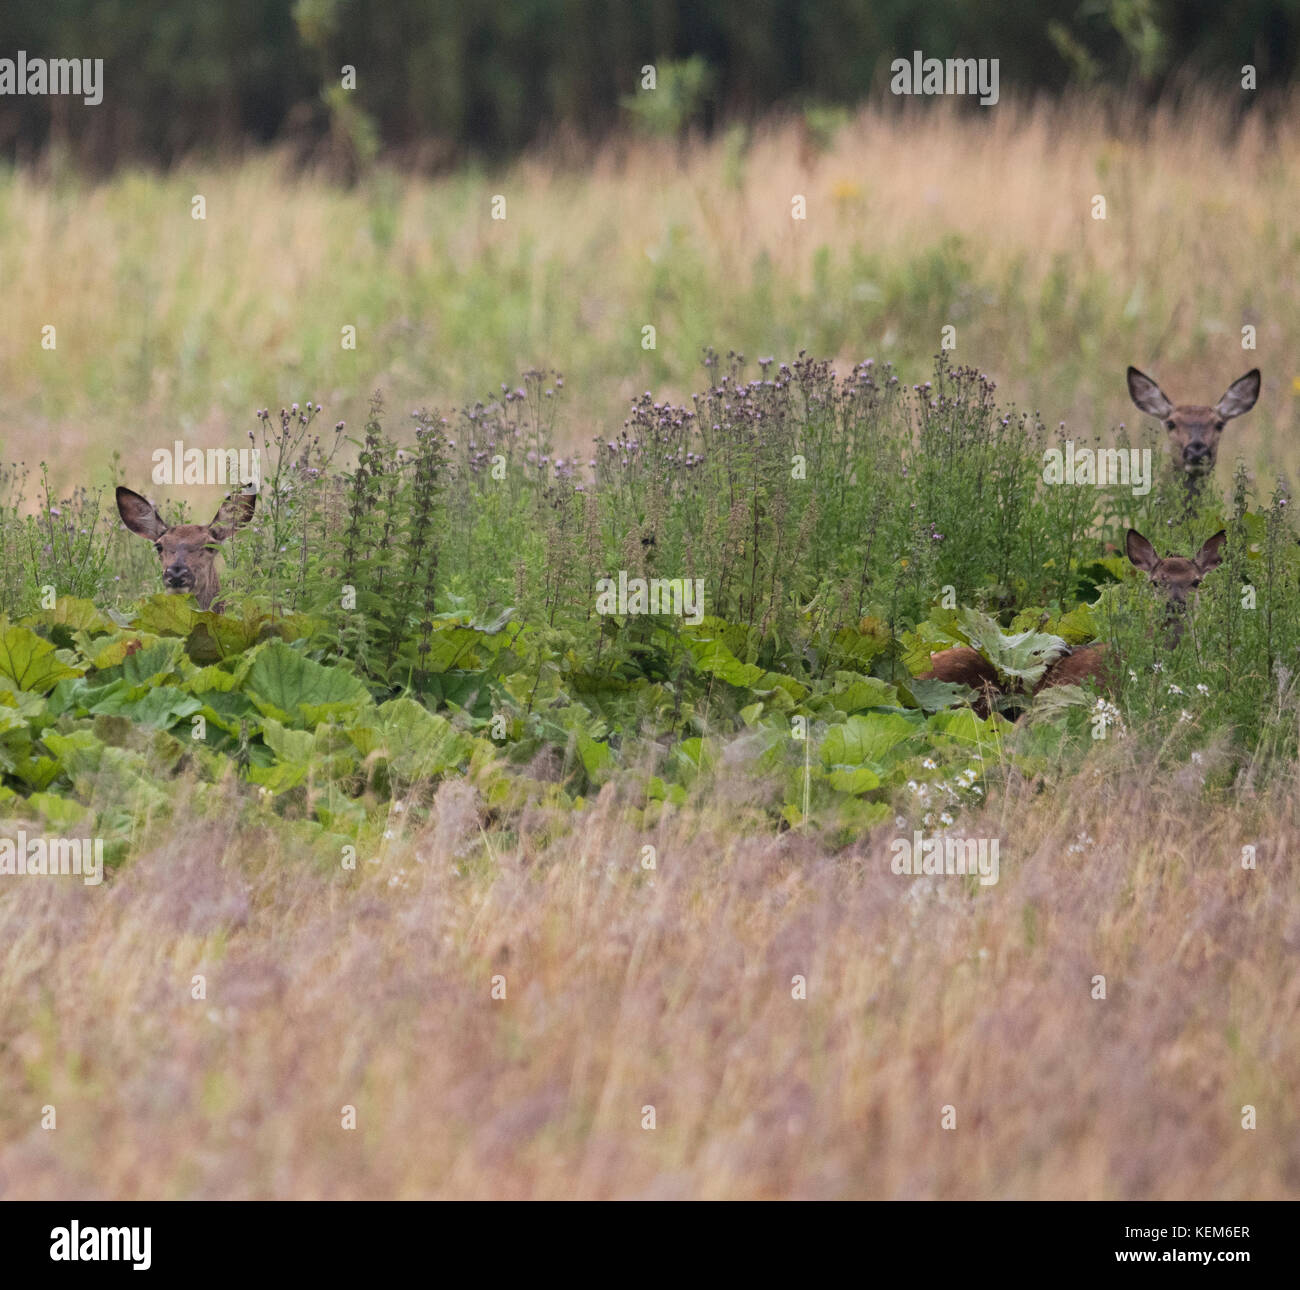 Hind ( Cervus elaphus) with young deer are feeding in a fallow field Stock Photo